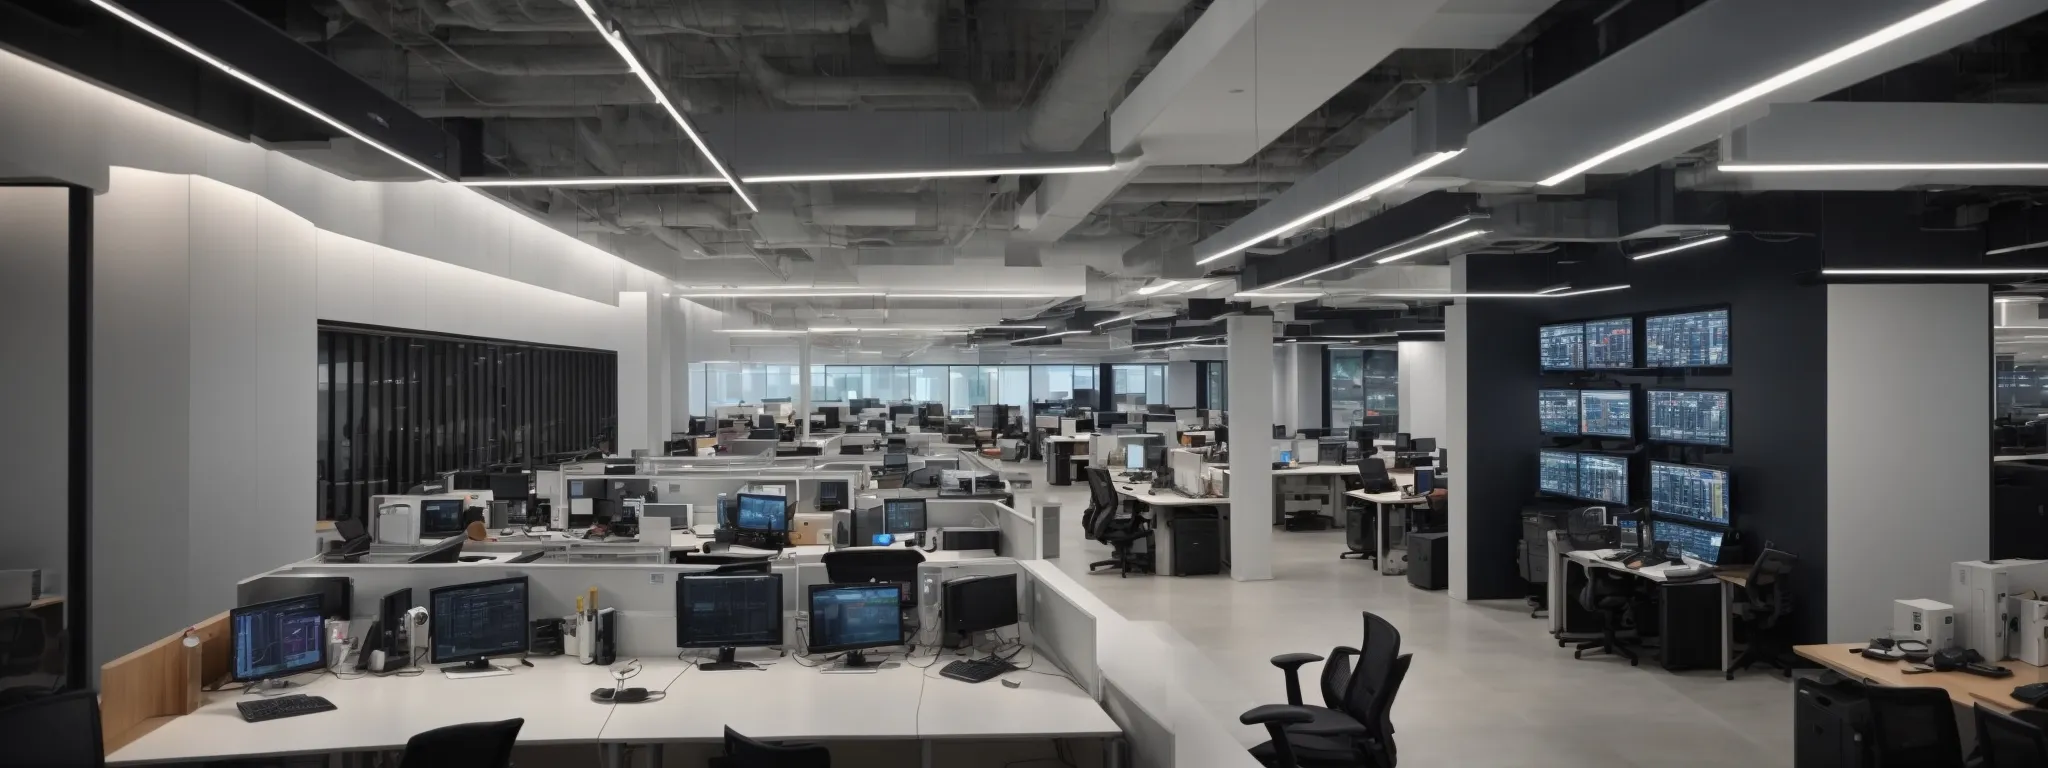 a wide-angle view of a modern, bustling corporate office with rows of computers hinting at sophisticated digital operations.